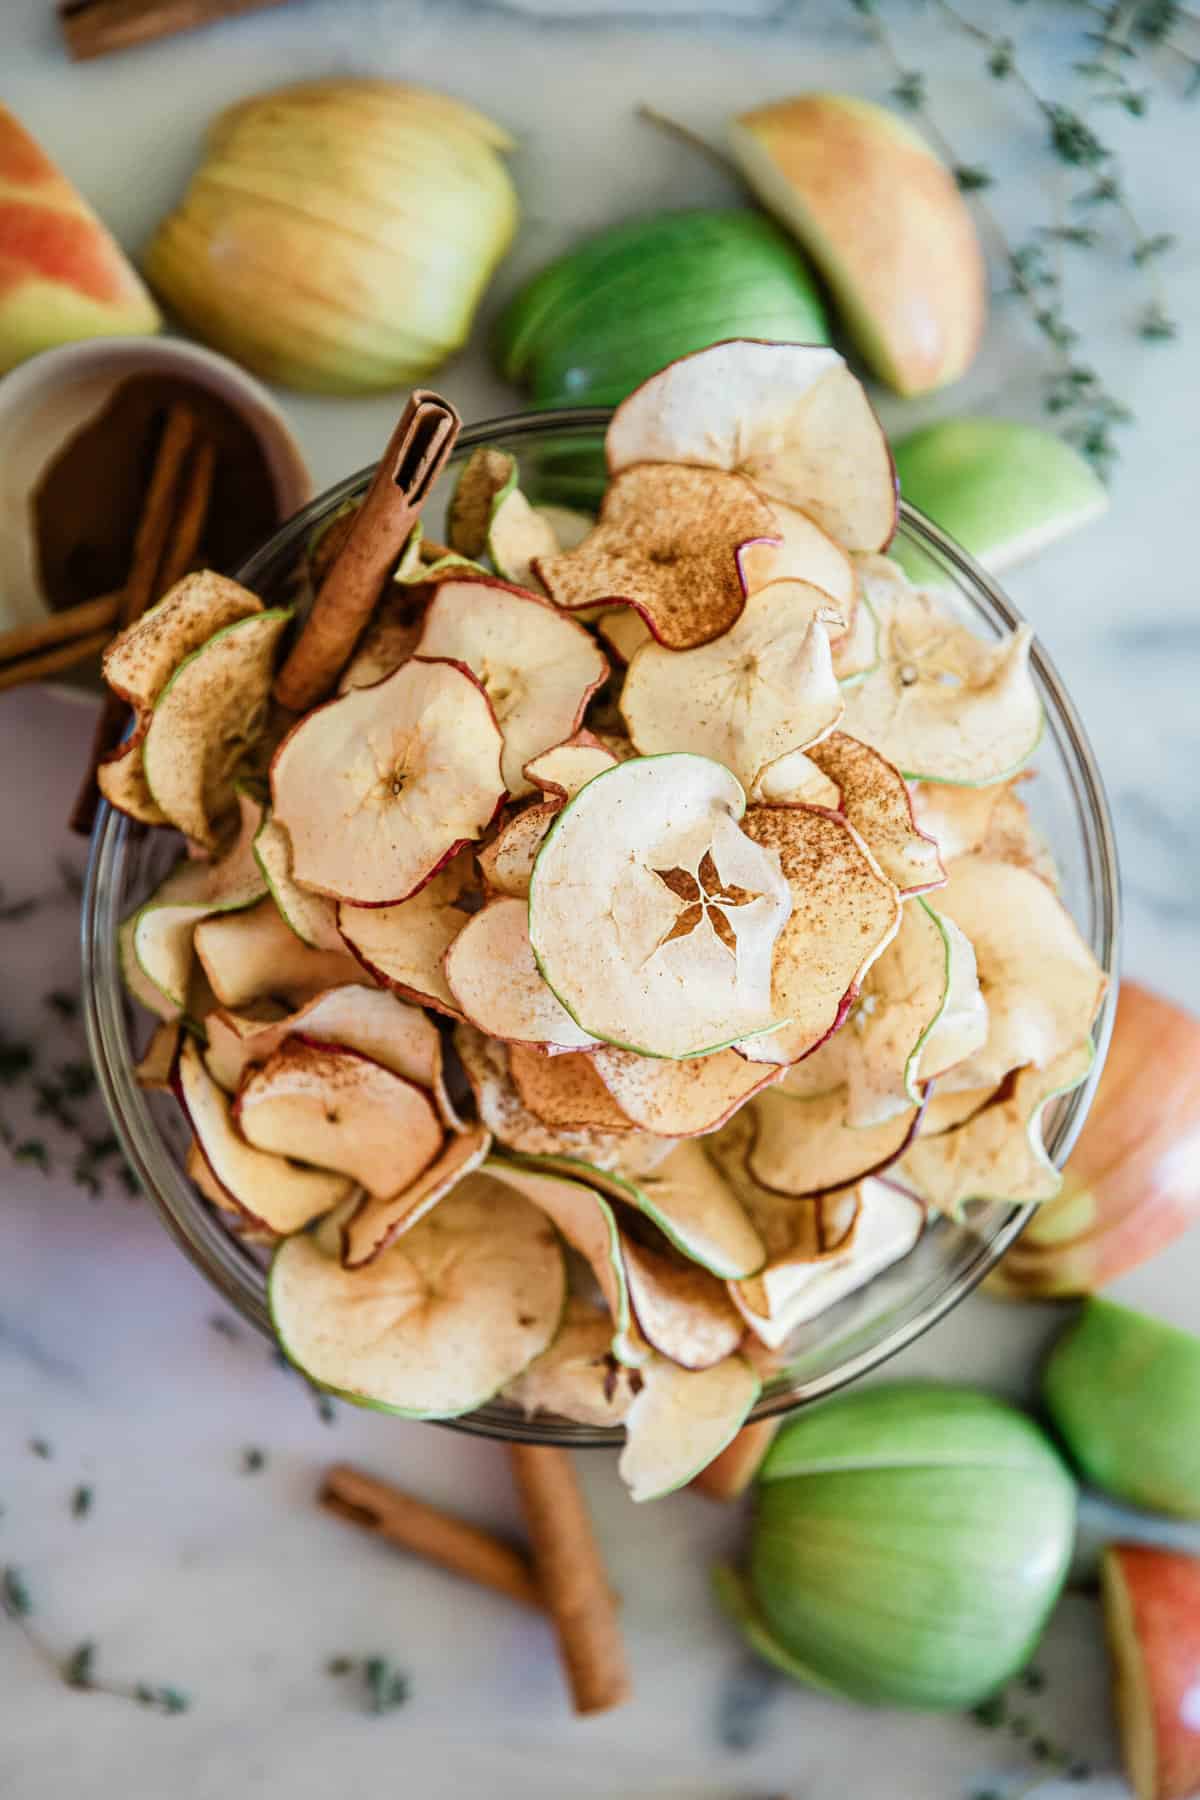 Apple chip recipe in a glass bowl. They are surrounded by sliced apples.